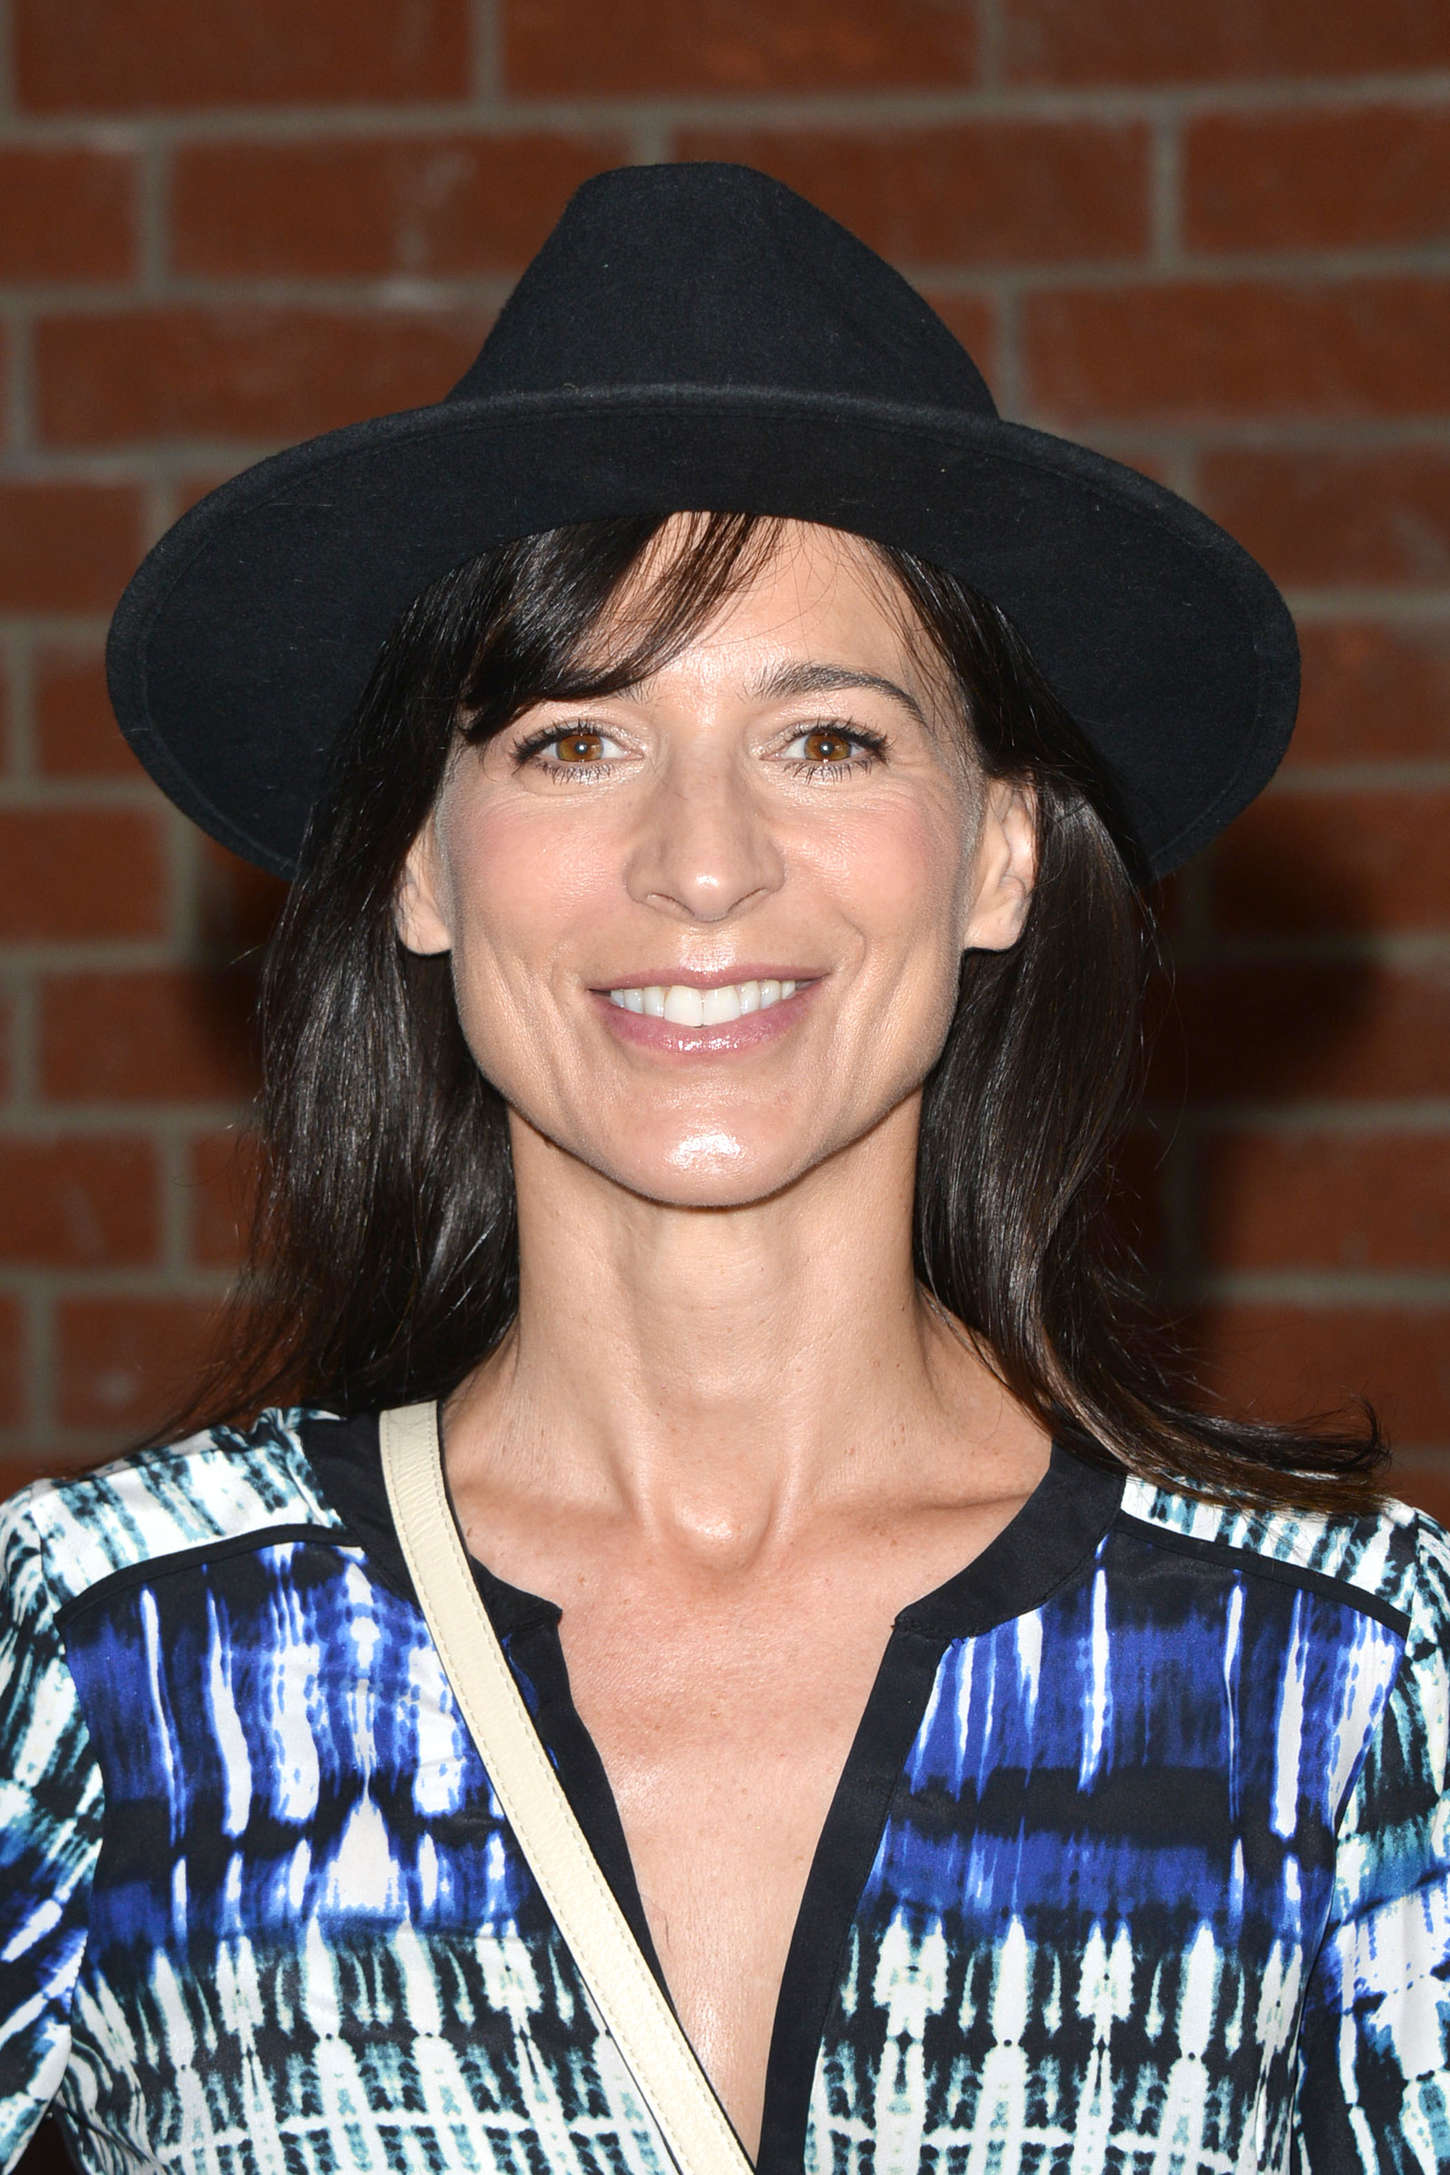 Perrey Reeves at Elizabeth Glaser Annual A Time for Heroes in Culver City